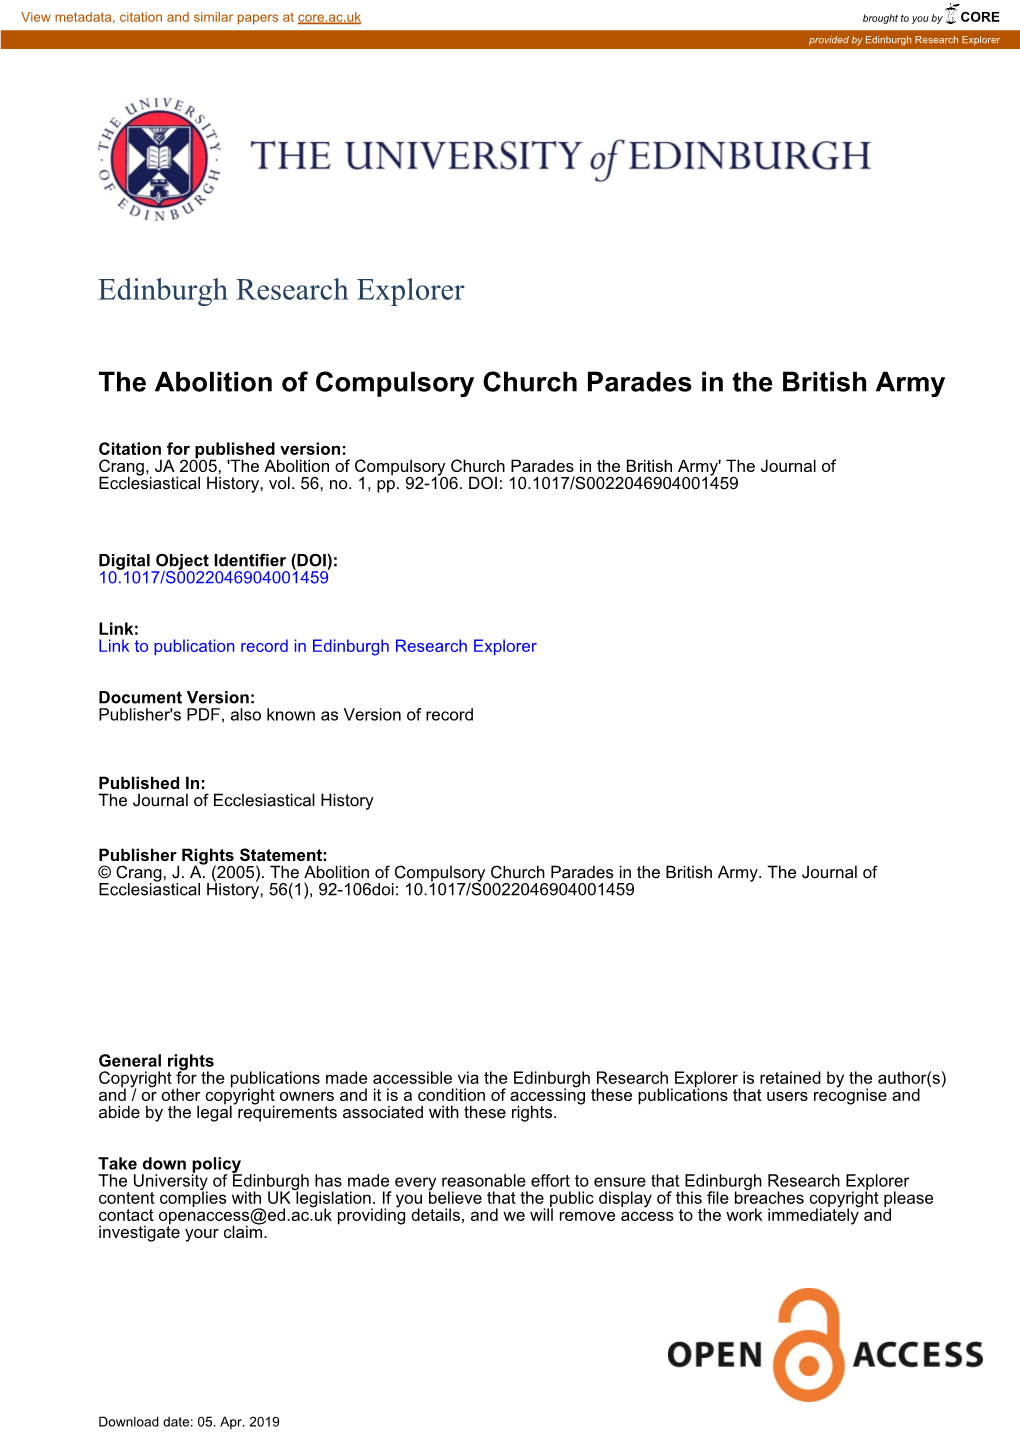 The Abolition of Compulsory Church Parades in the British Army